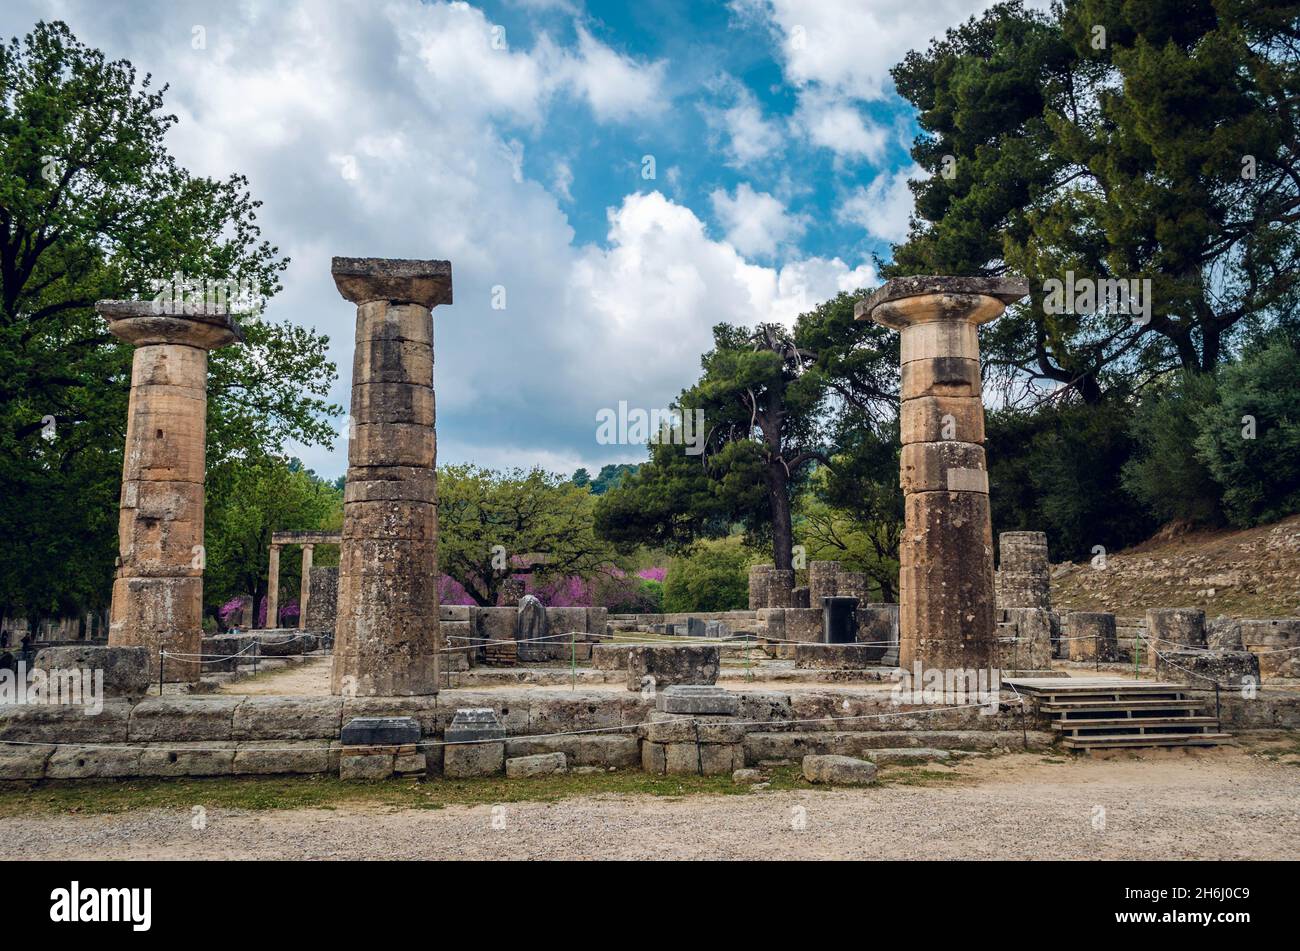 The archaeological site of ancient Olympia. The place where olympic games were born in classical times and where the Olympic torch today is ignited. Stock Photo